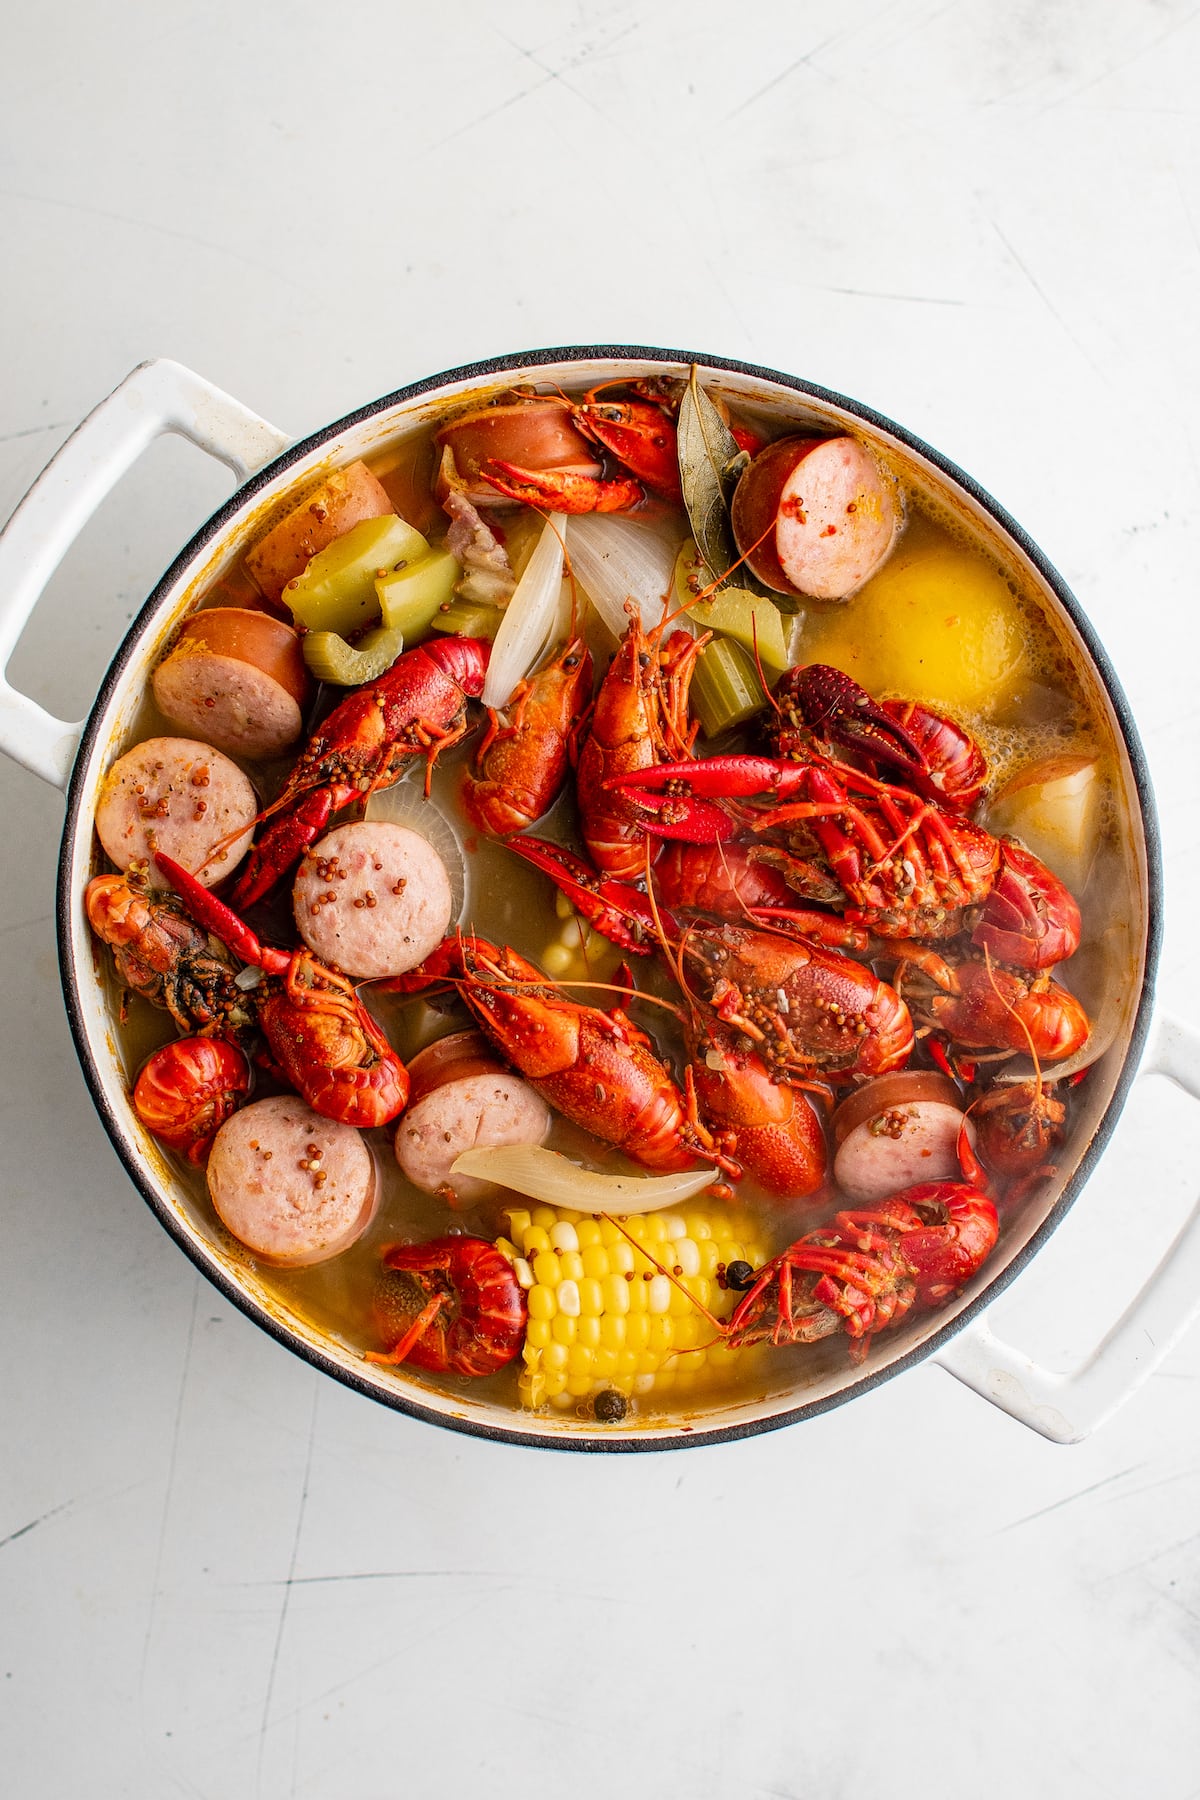 Crawfish, corn, sausage and more in a pot.